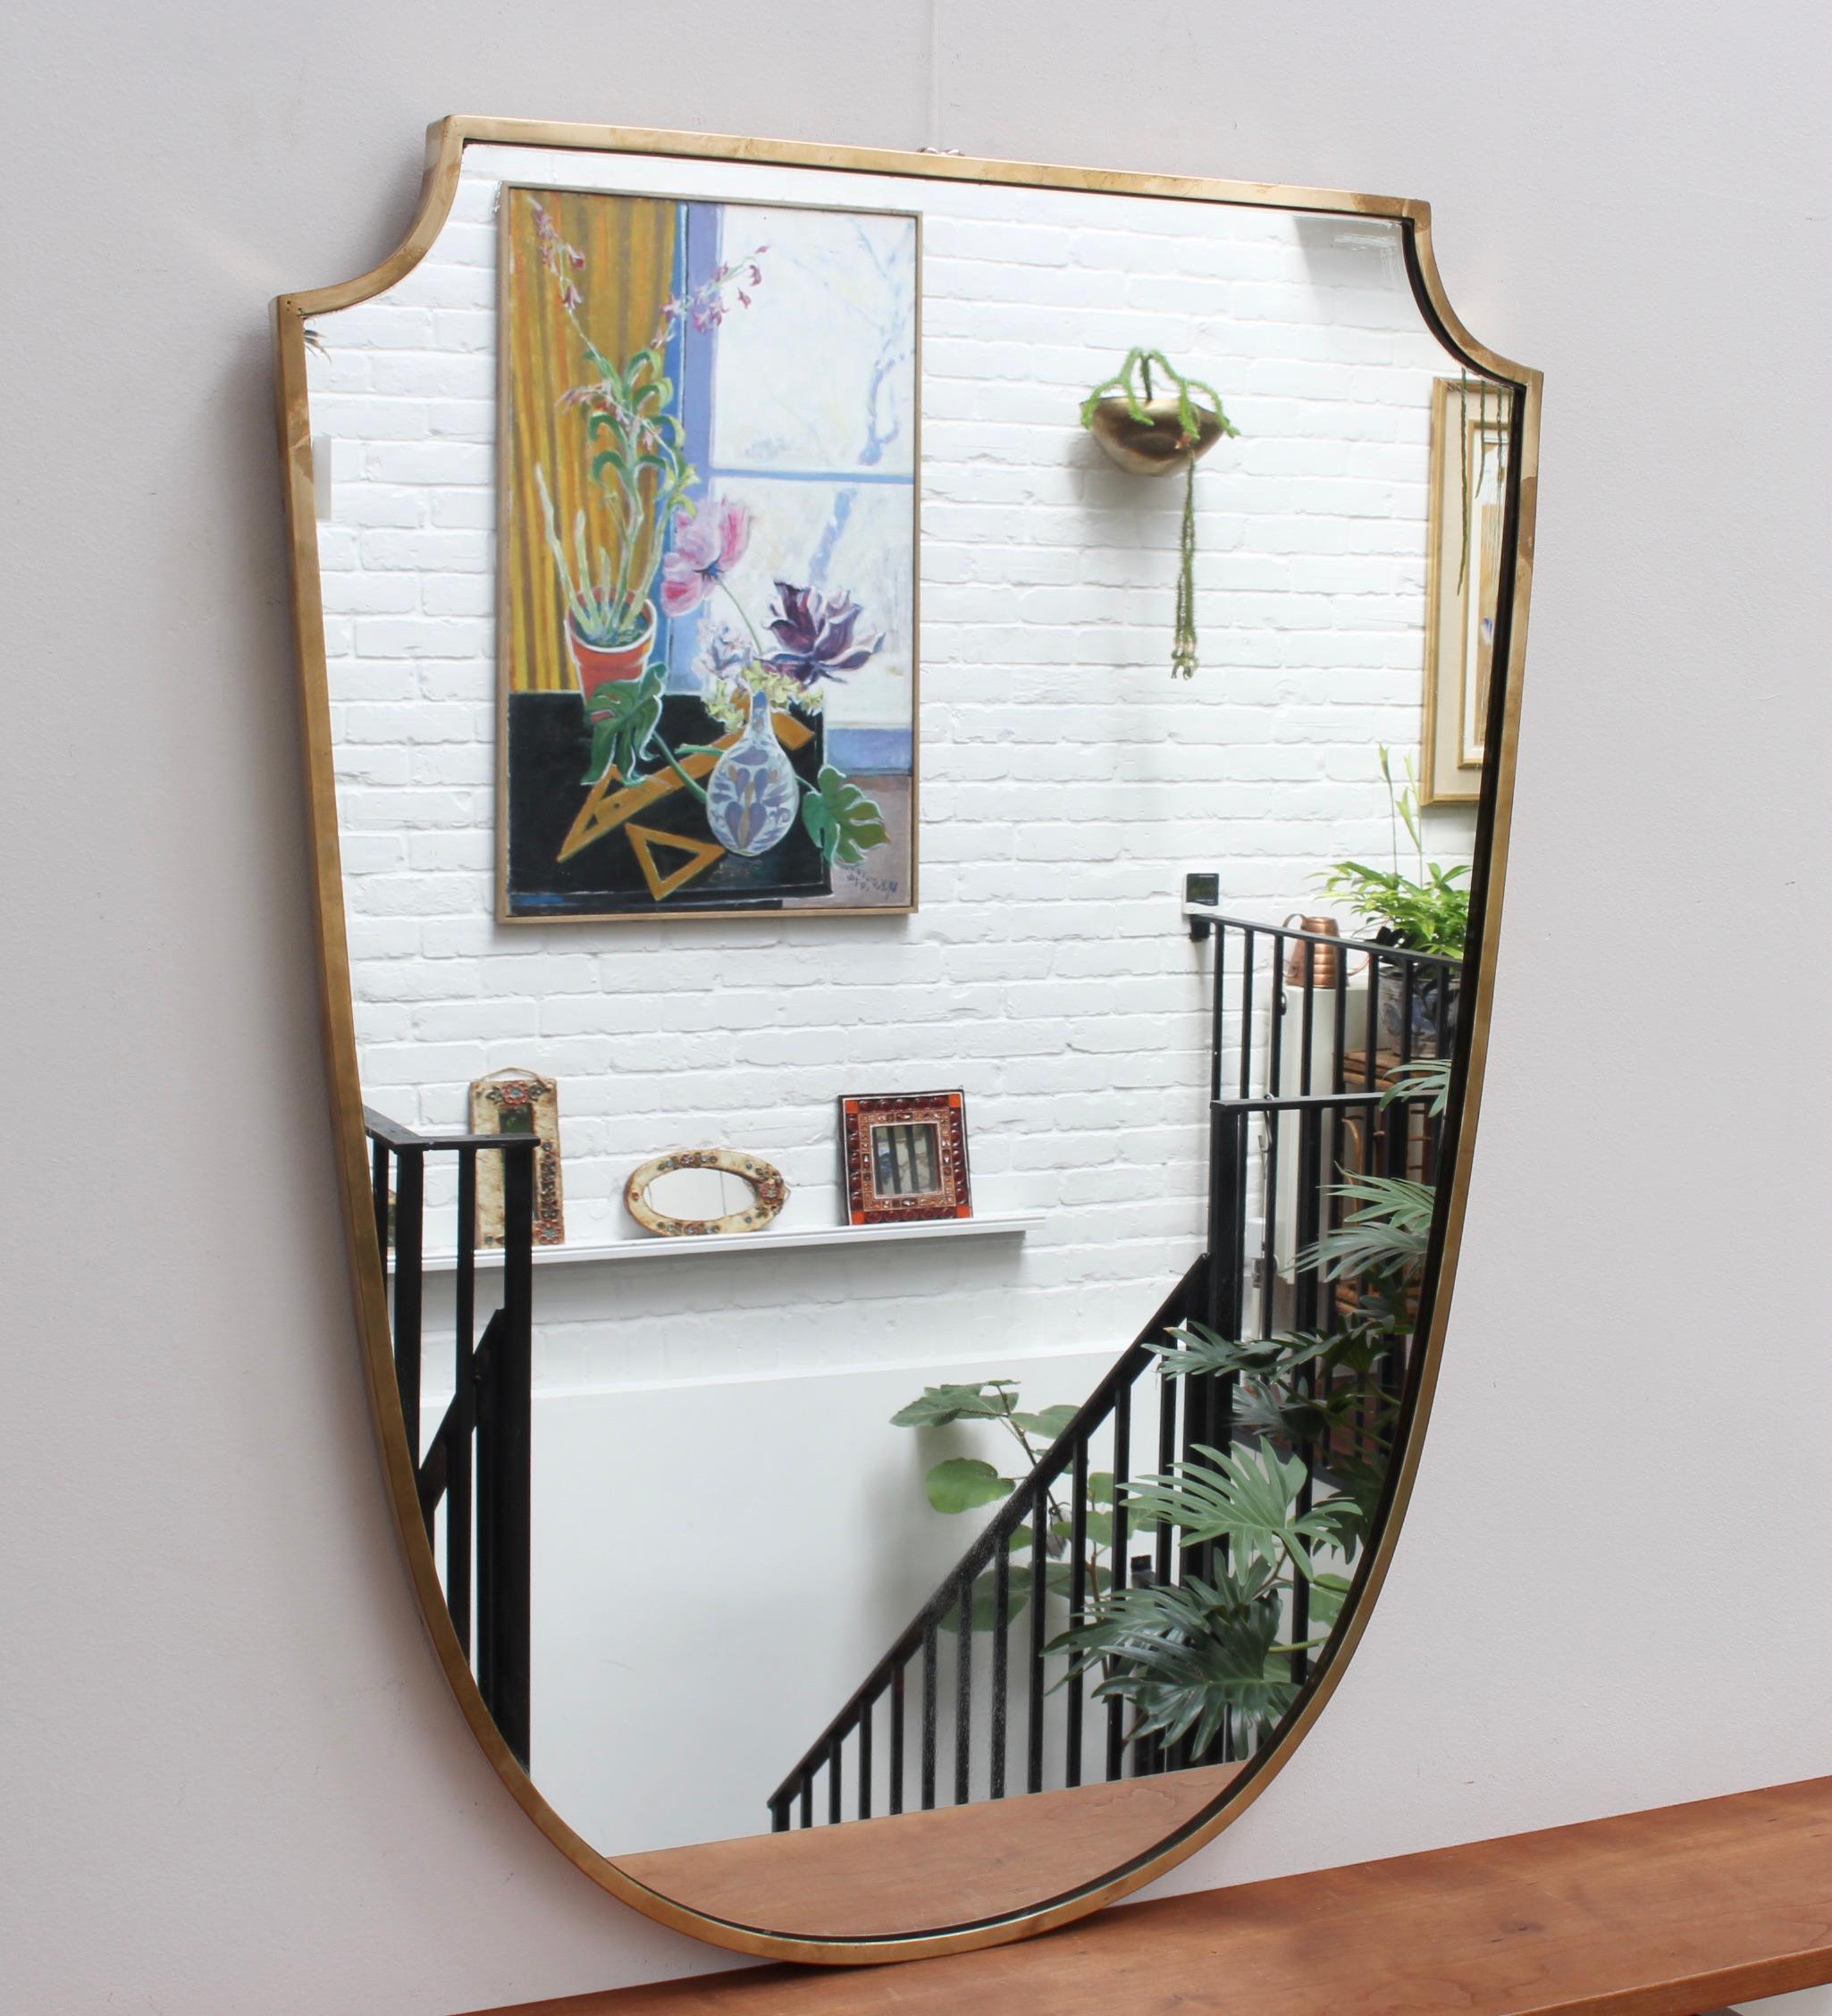 Large vintage Italian wall mirror with brass frame (circa 1950s). The mirror is large with sensuous curves, solidity, weightiness and elegant good looks. The crest-shape is also powerful and imposing. It is in overall good vintage condition